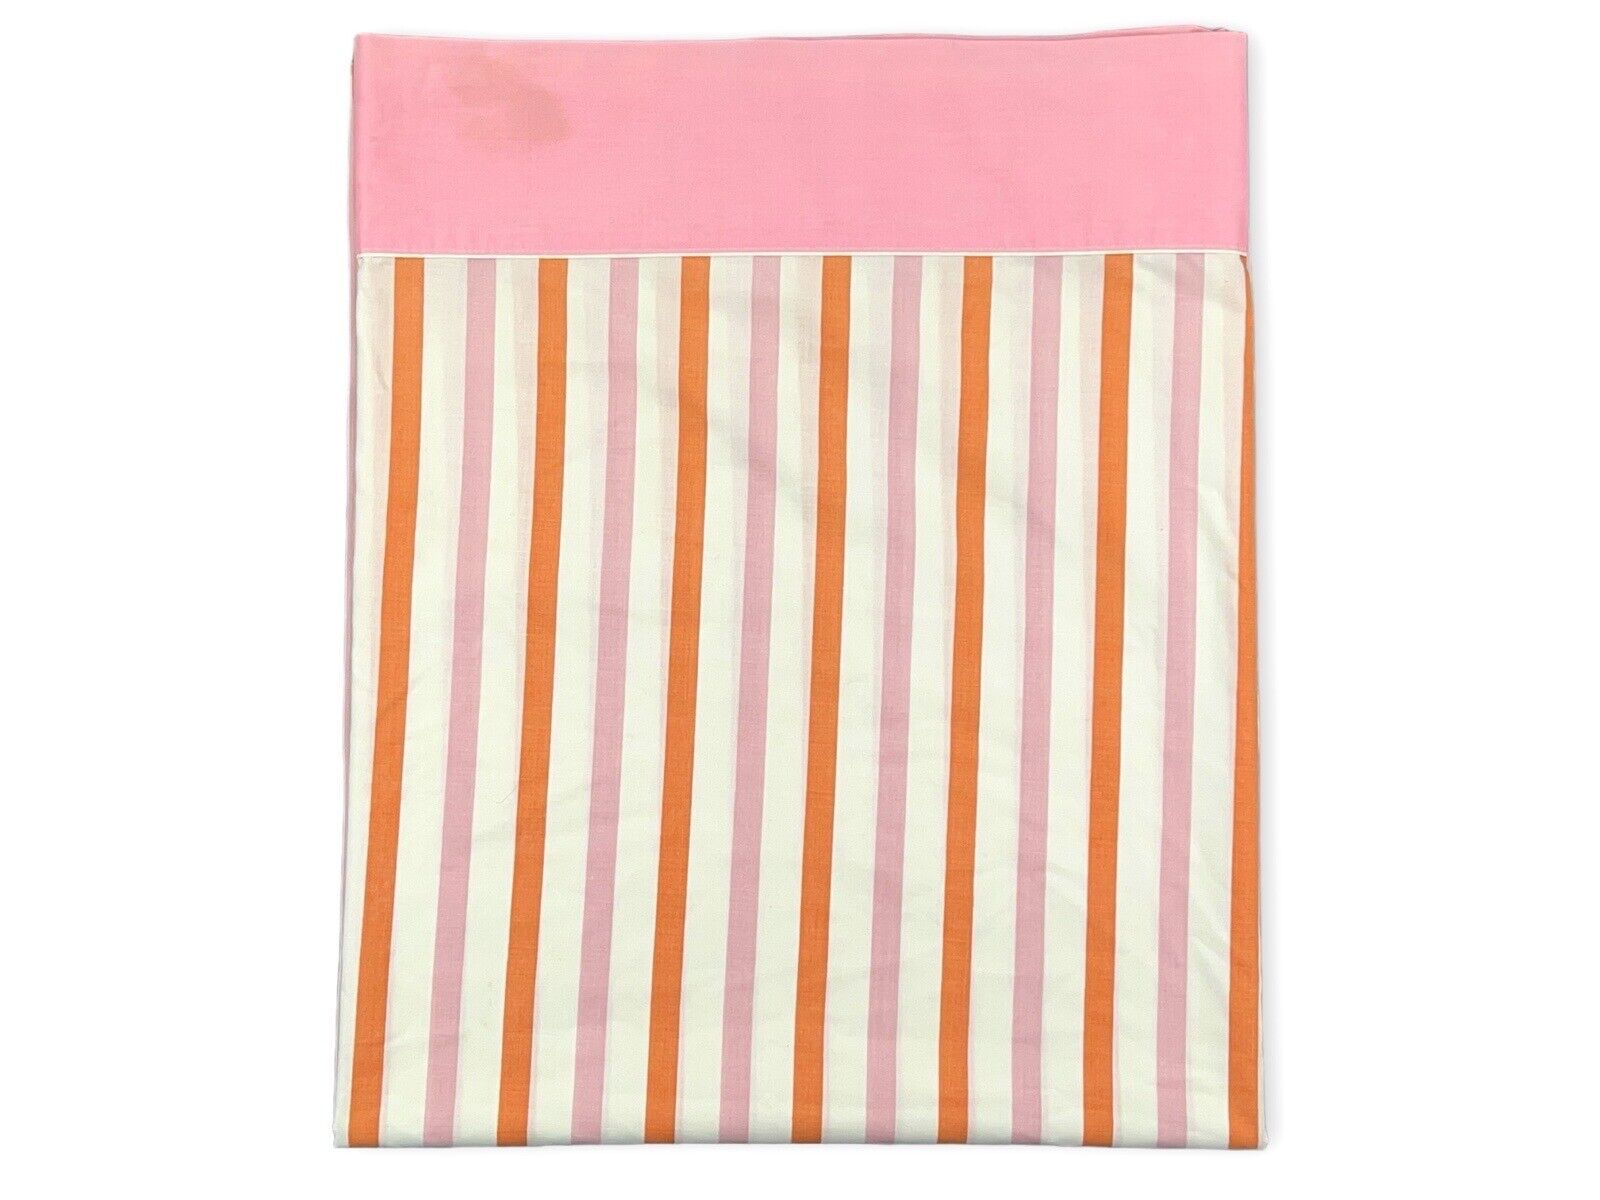 Vintage CANNON MONTICELLO Full FLAT Sheet PINK Stripes Sheets USA No Iron Muslin